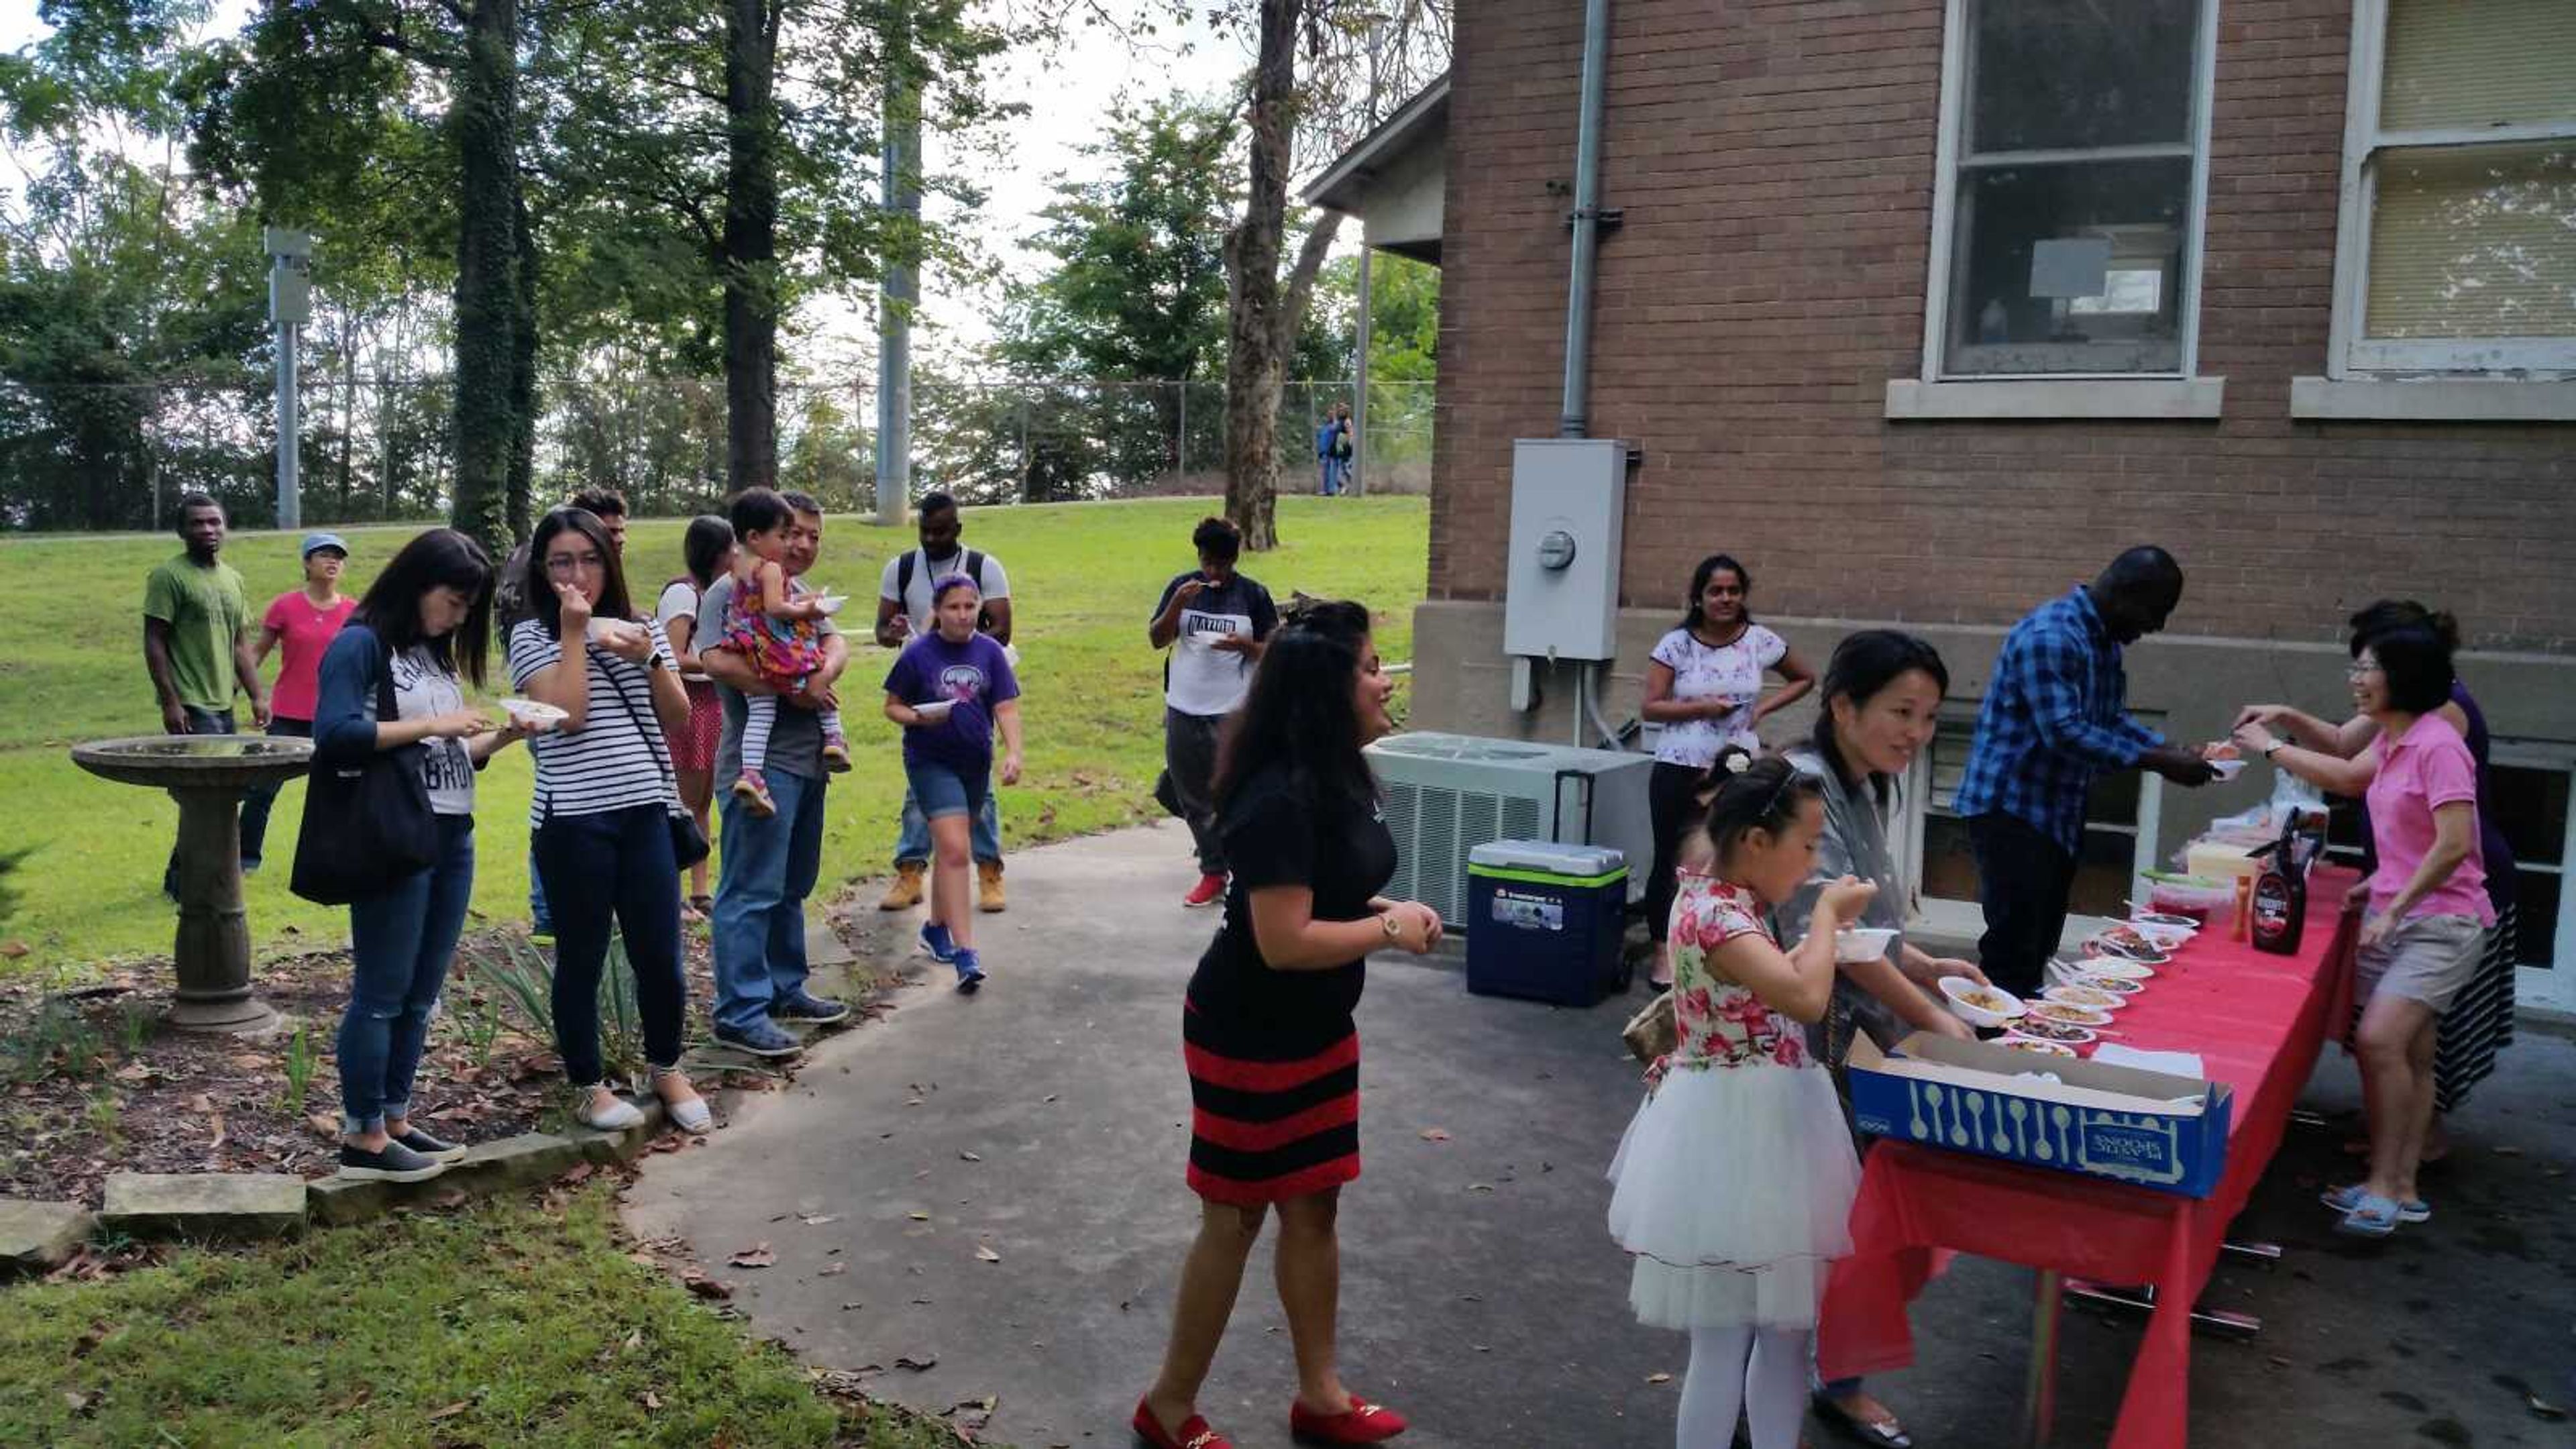 Students, faculty and staff gathered in front of the International Center on Saturday for an ice cream social held by the Intensive English Programs and International Education and Services.